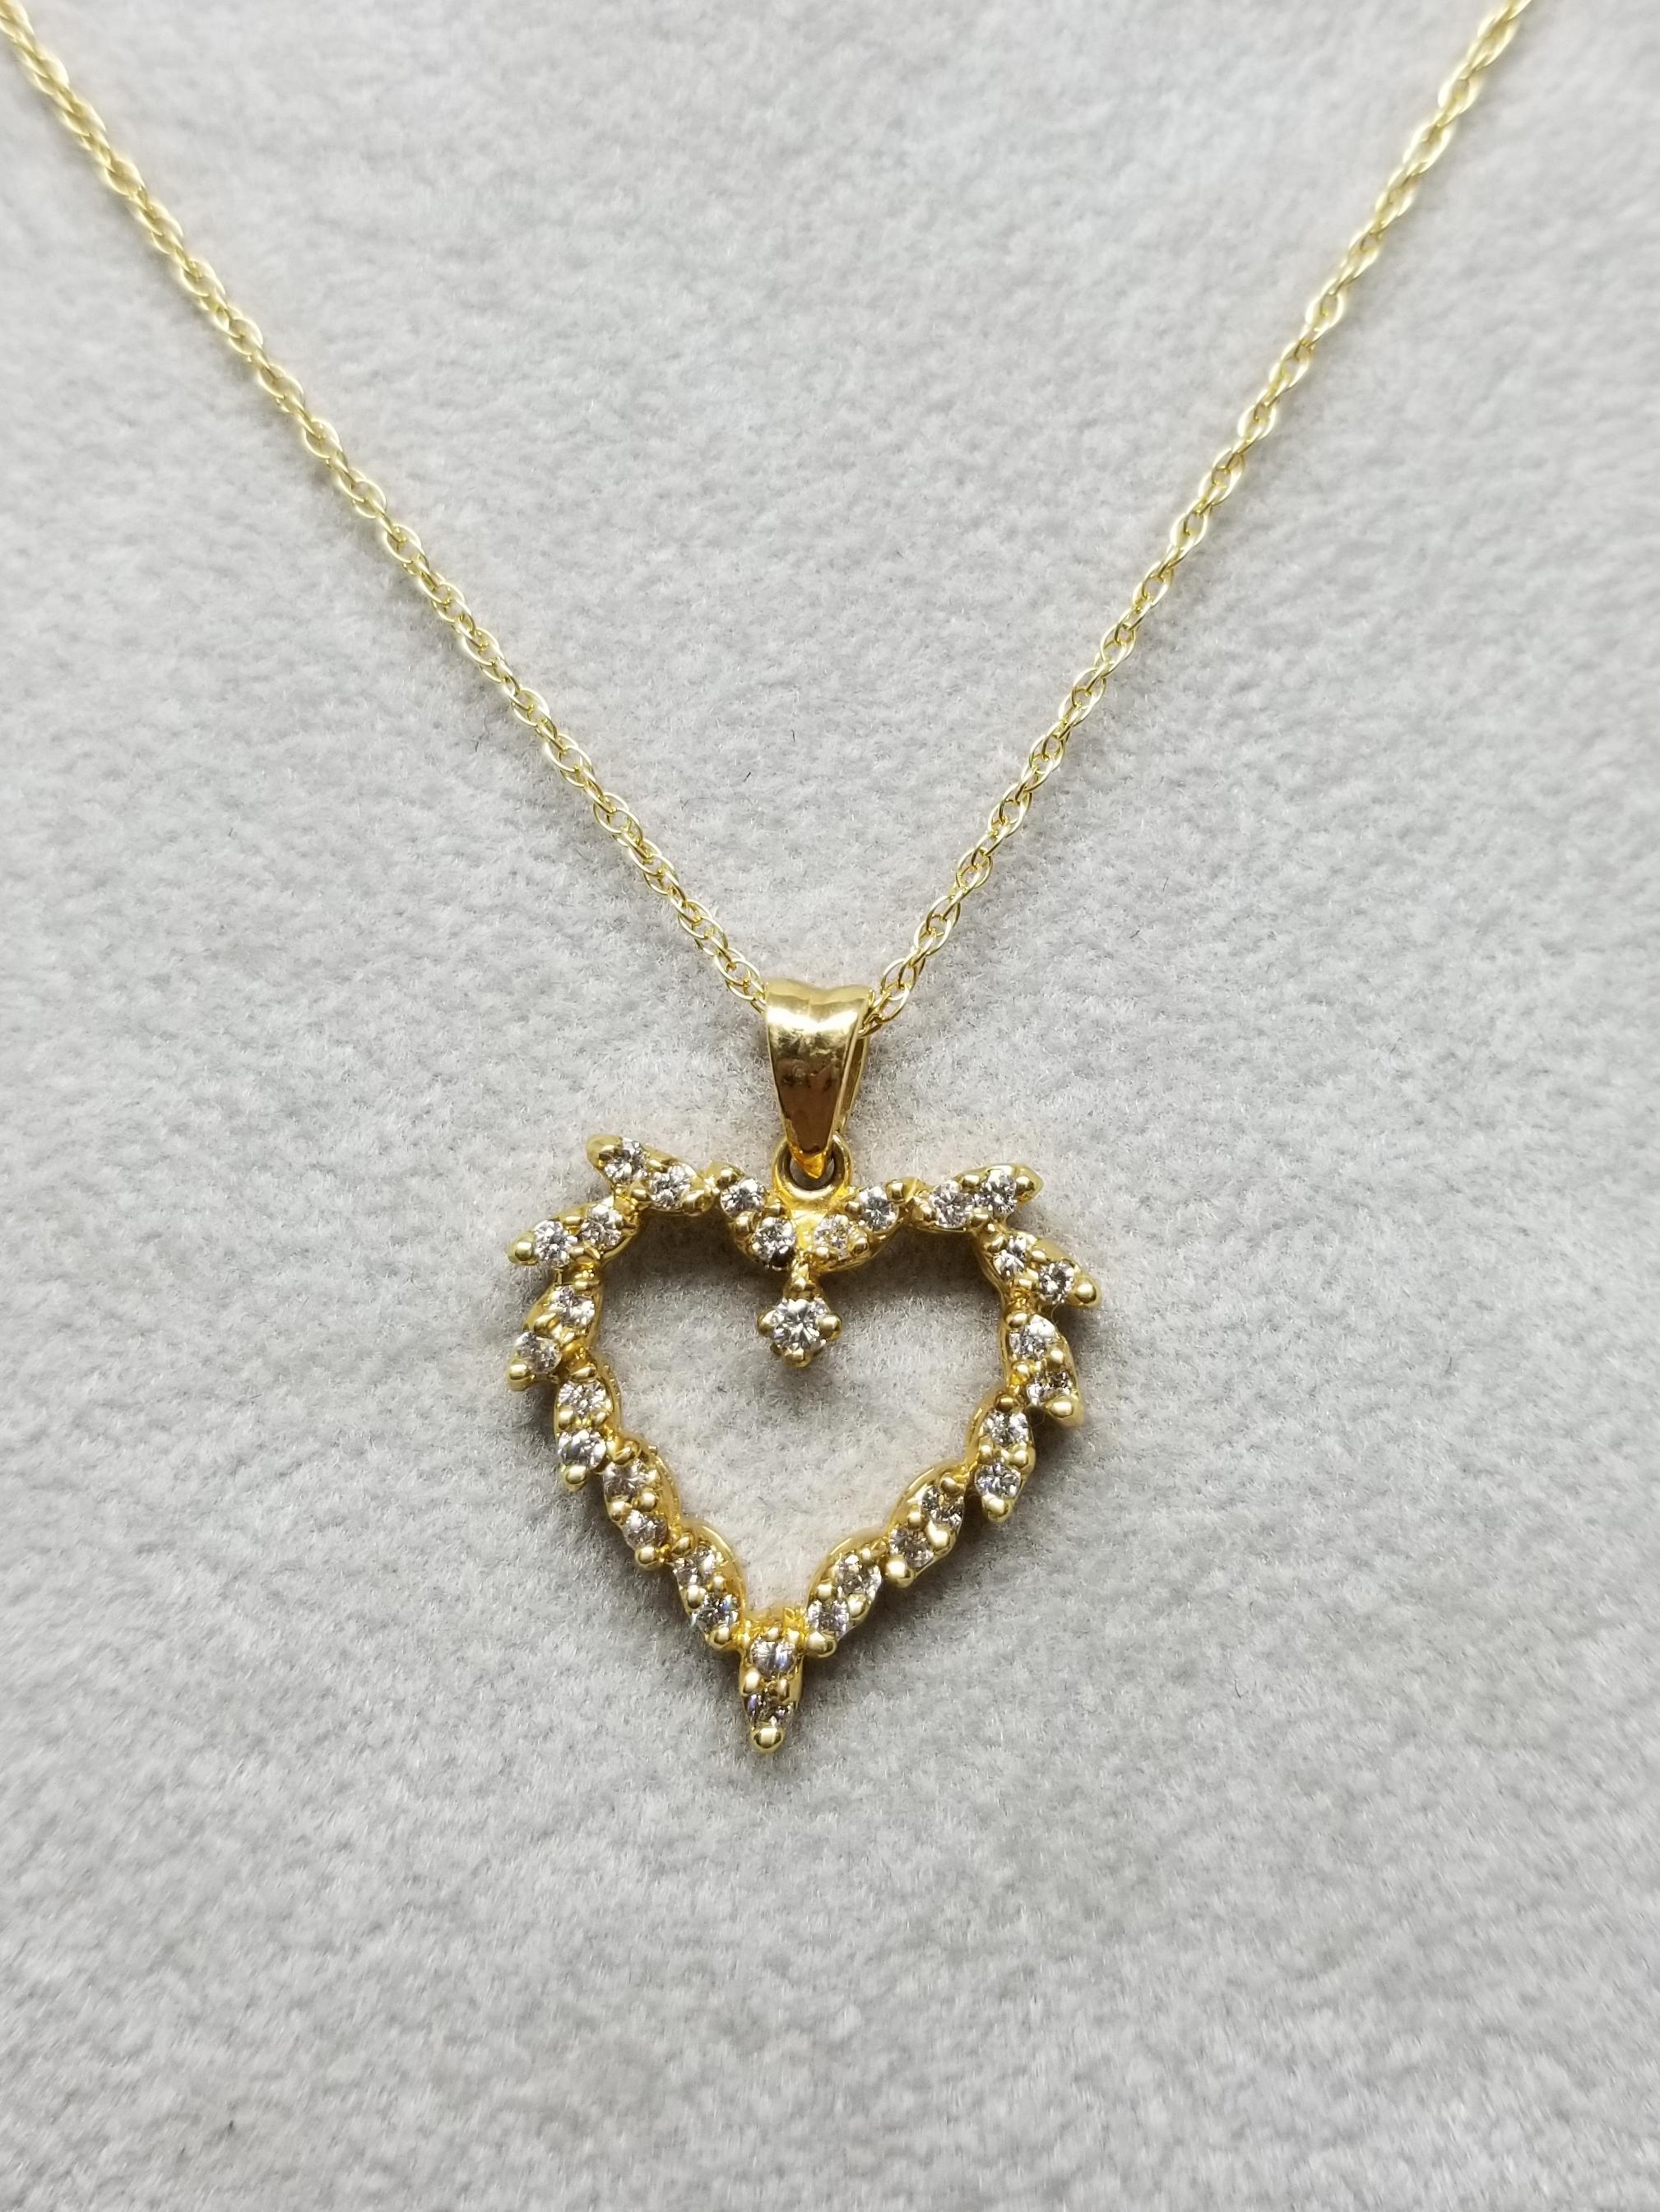 14k yellow gold diamond heart pendant set with 2 rounds in a marquise setting, containing 31 round full cut diamonds of very fine quality weighing .55pts. on a 16 inch chain.